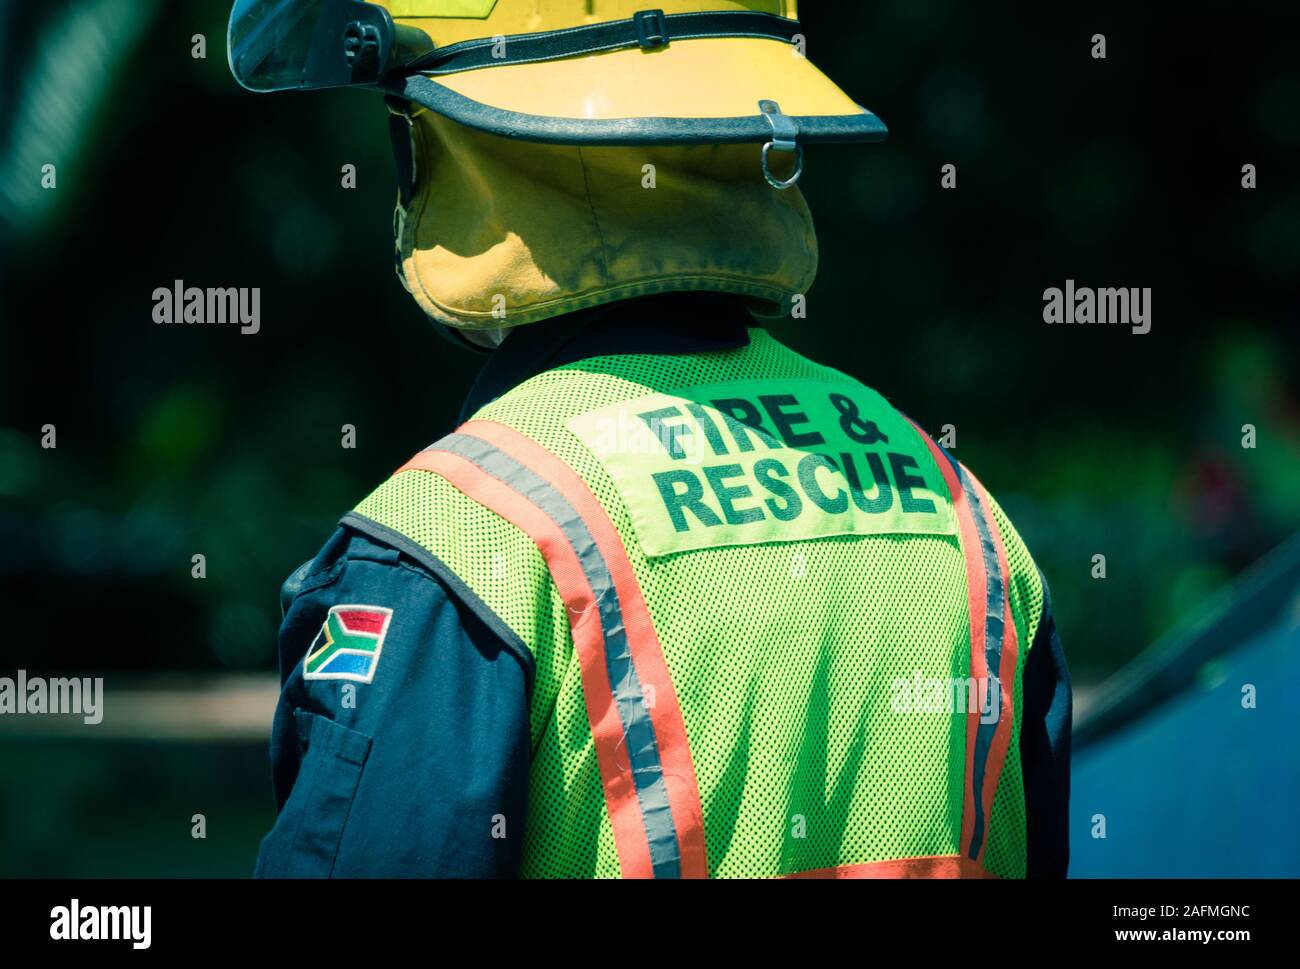 South African fire and rescue services firemen or firefighter wearing uniform, helmet and high visibility clothing at a road accident scene cleanup Stock Photo